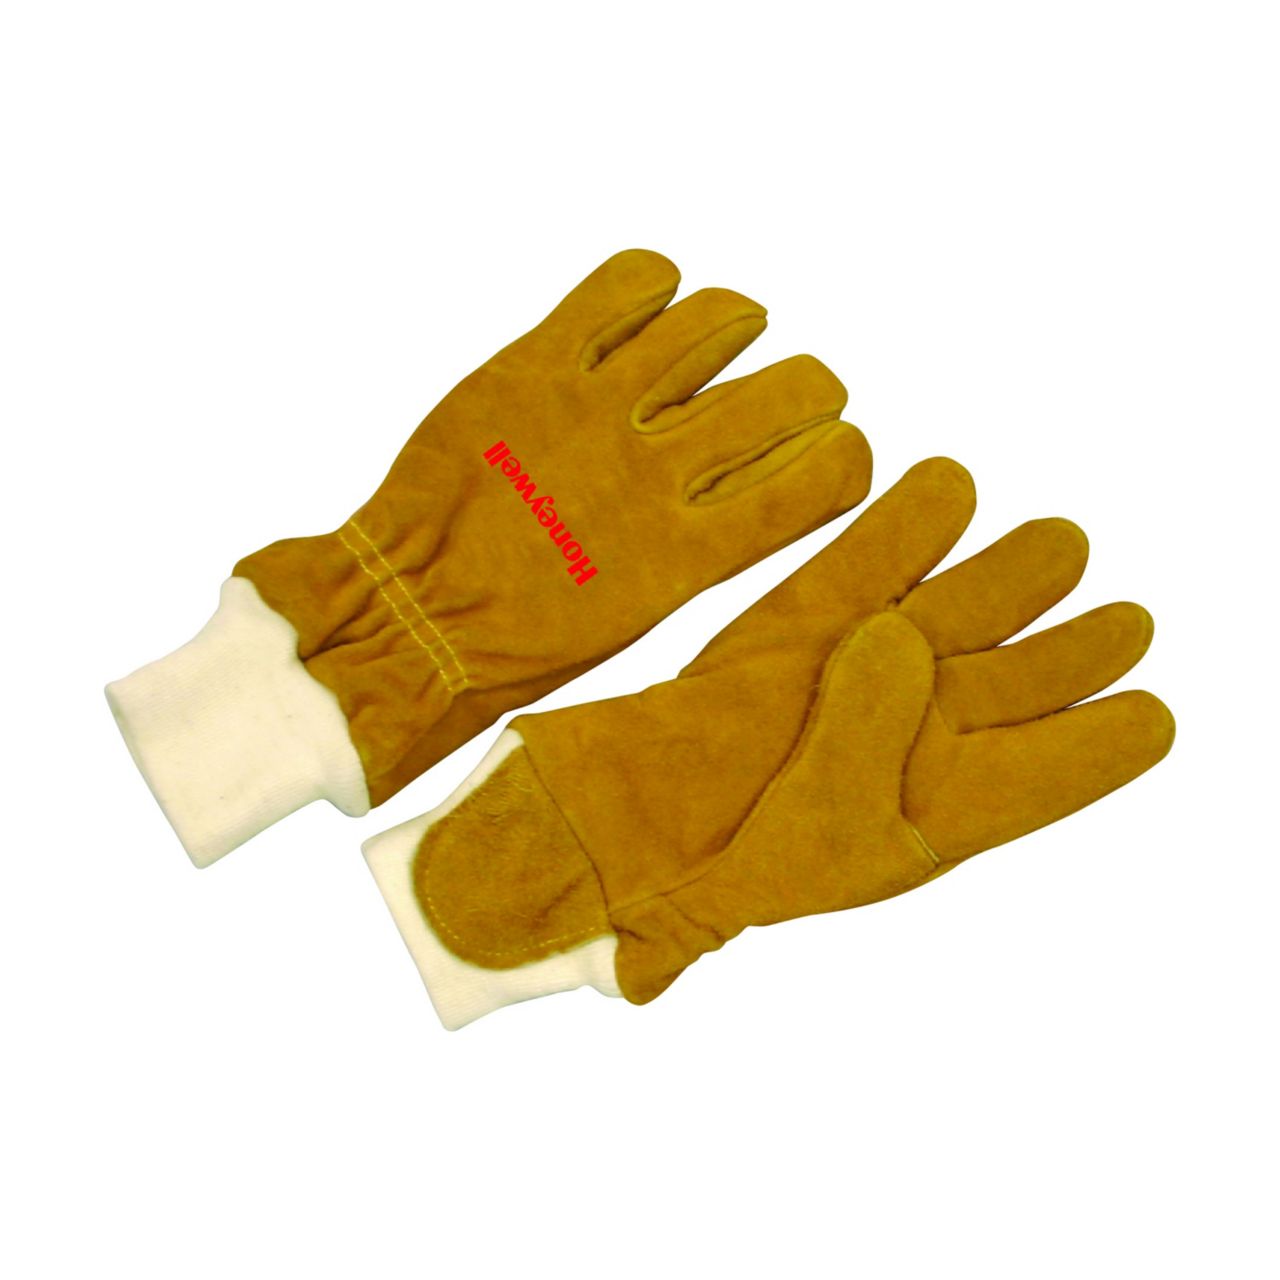 HONEYWELL AFW COWHIDE- POLY WRISTLET SAFETY GLOVE, SIZE L